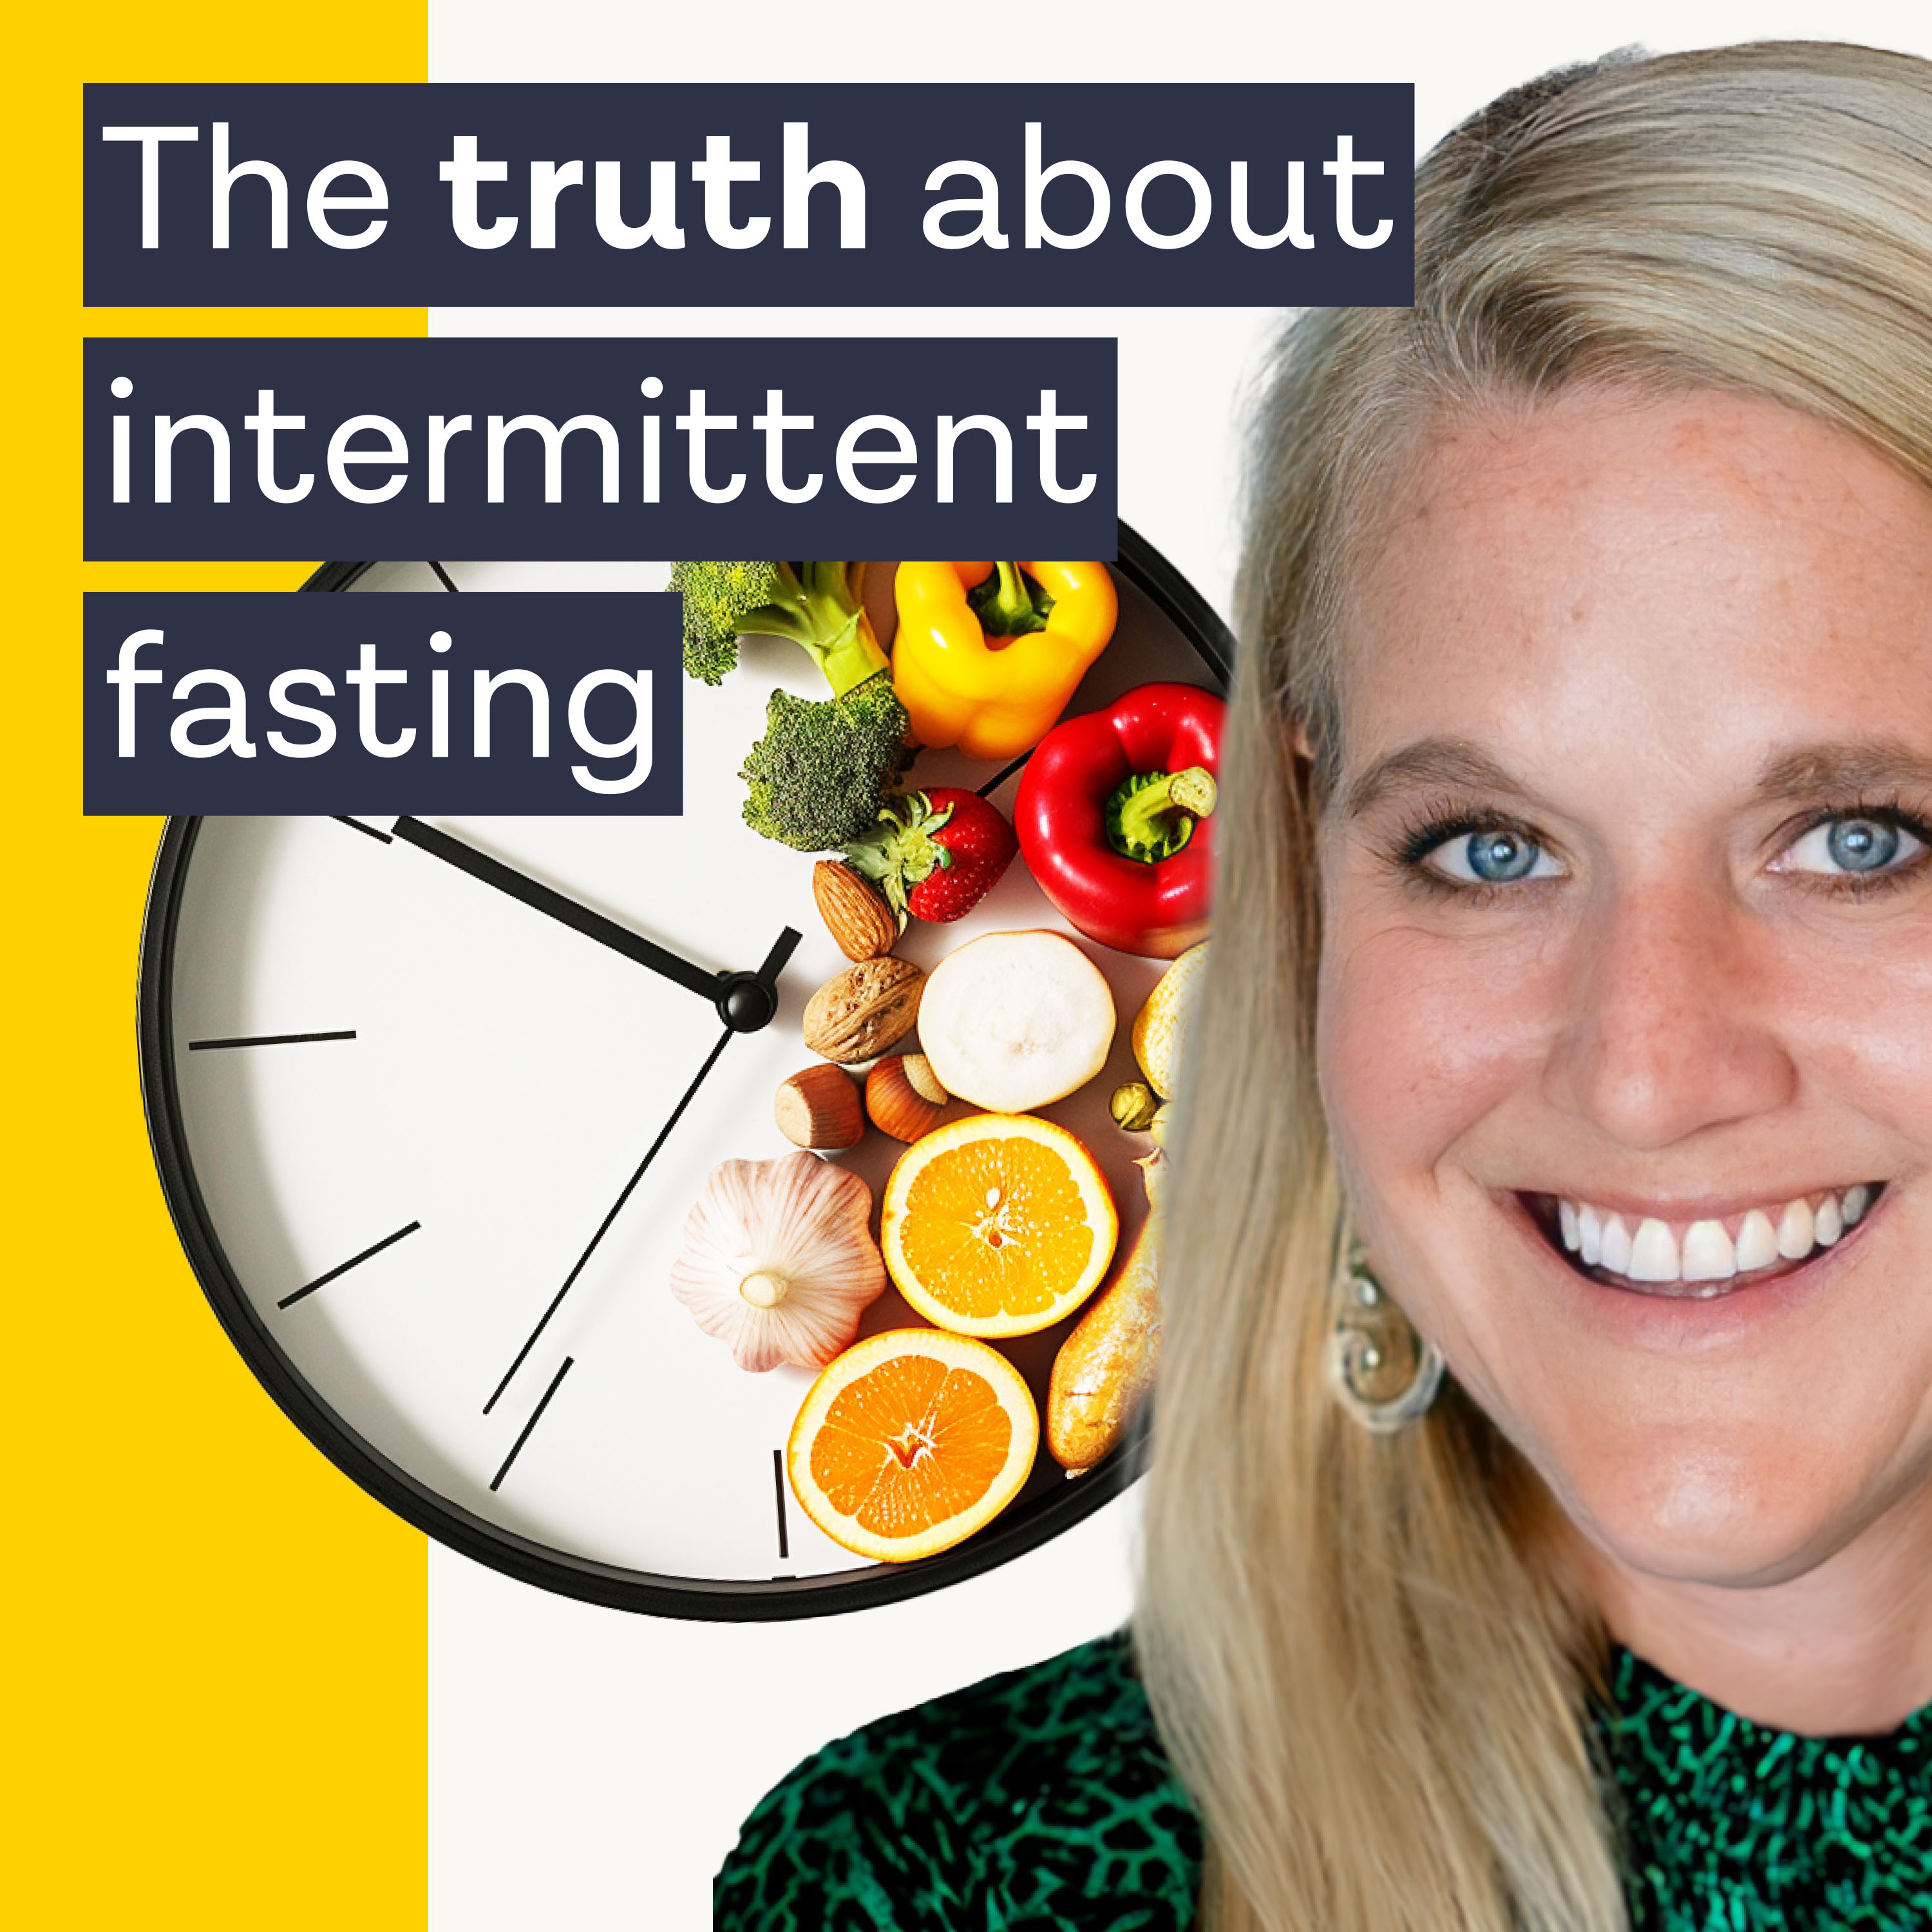 Intermittent fasting: what we learned from the world’s biggest study with Prof. Tim Spector & Gin Stephens